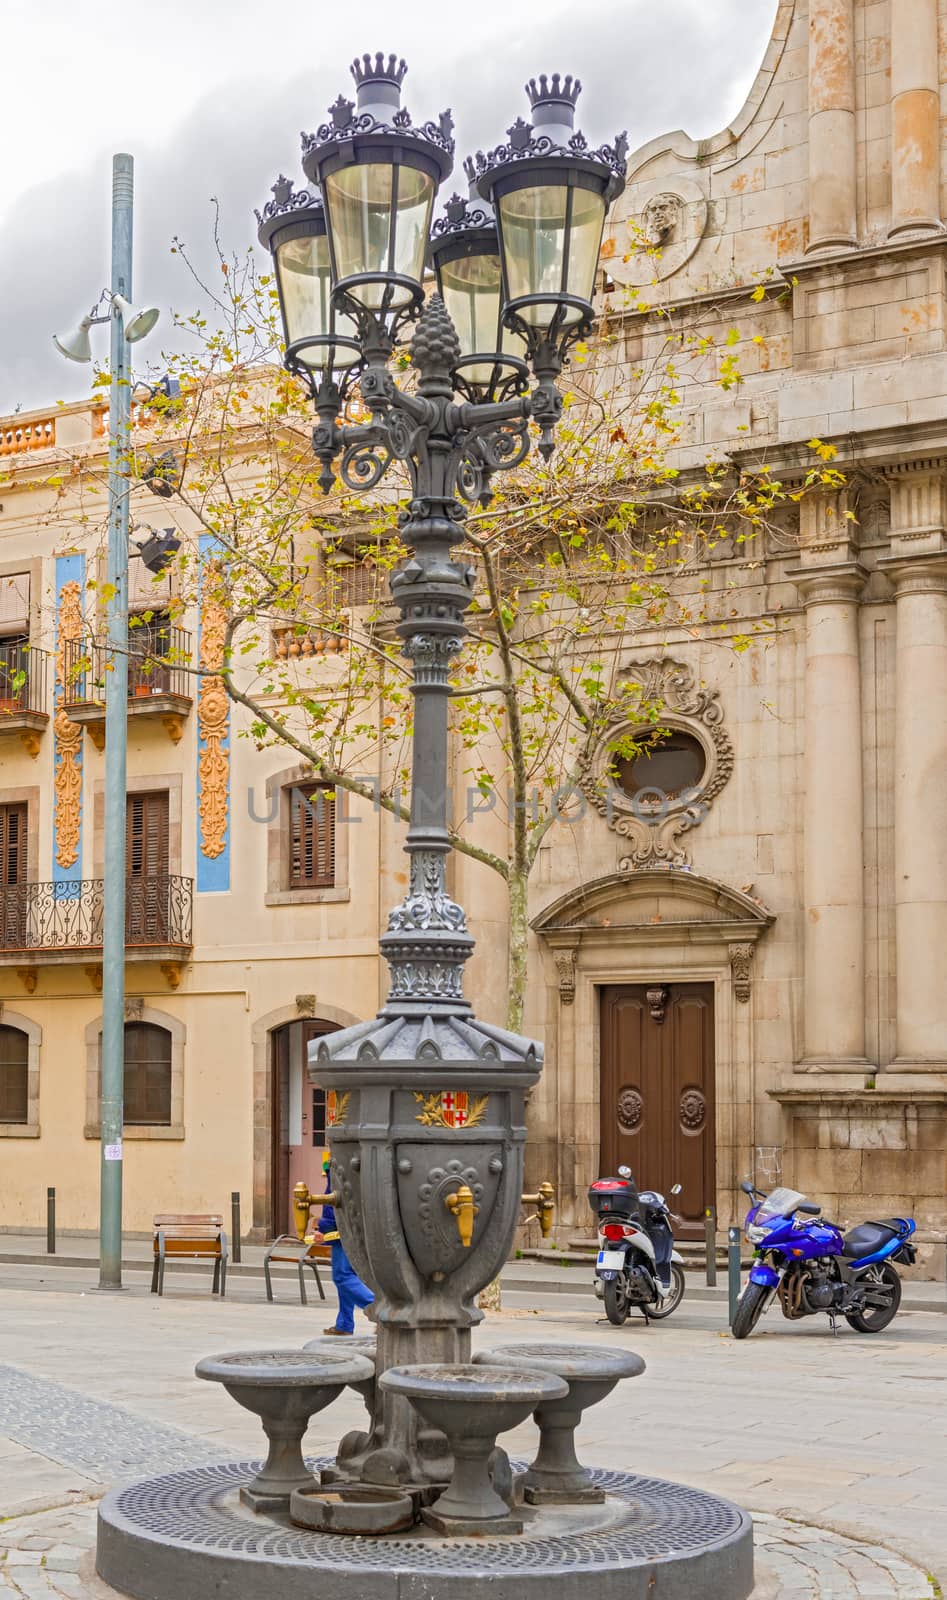 Street Lamp in Barcelona, Spain by Marcus